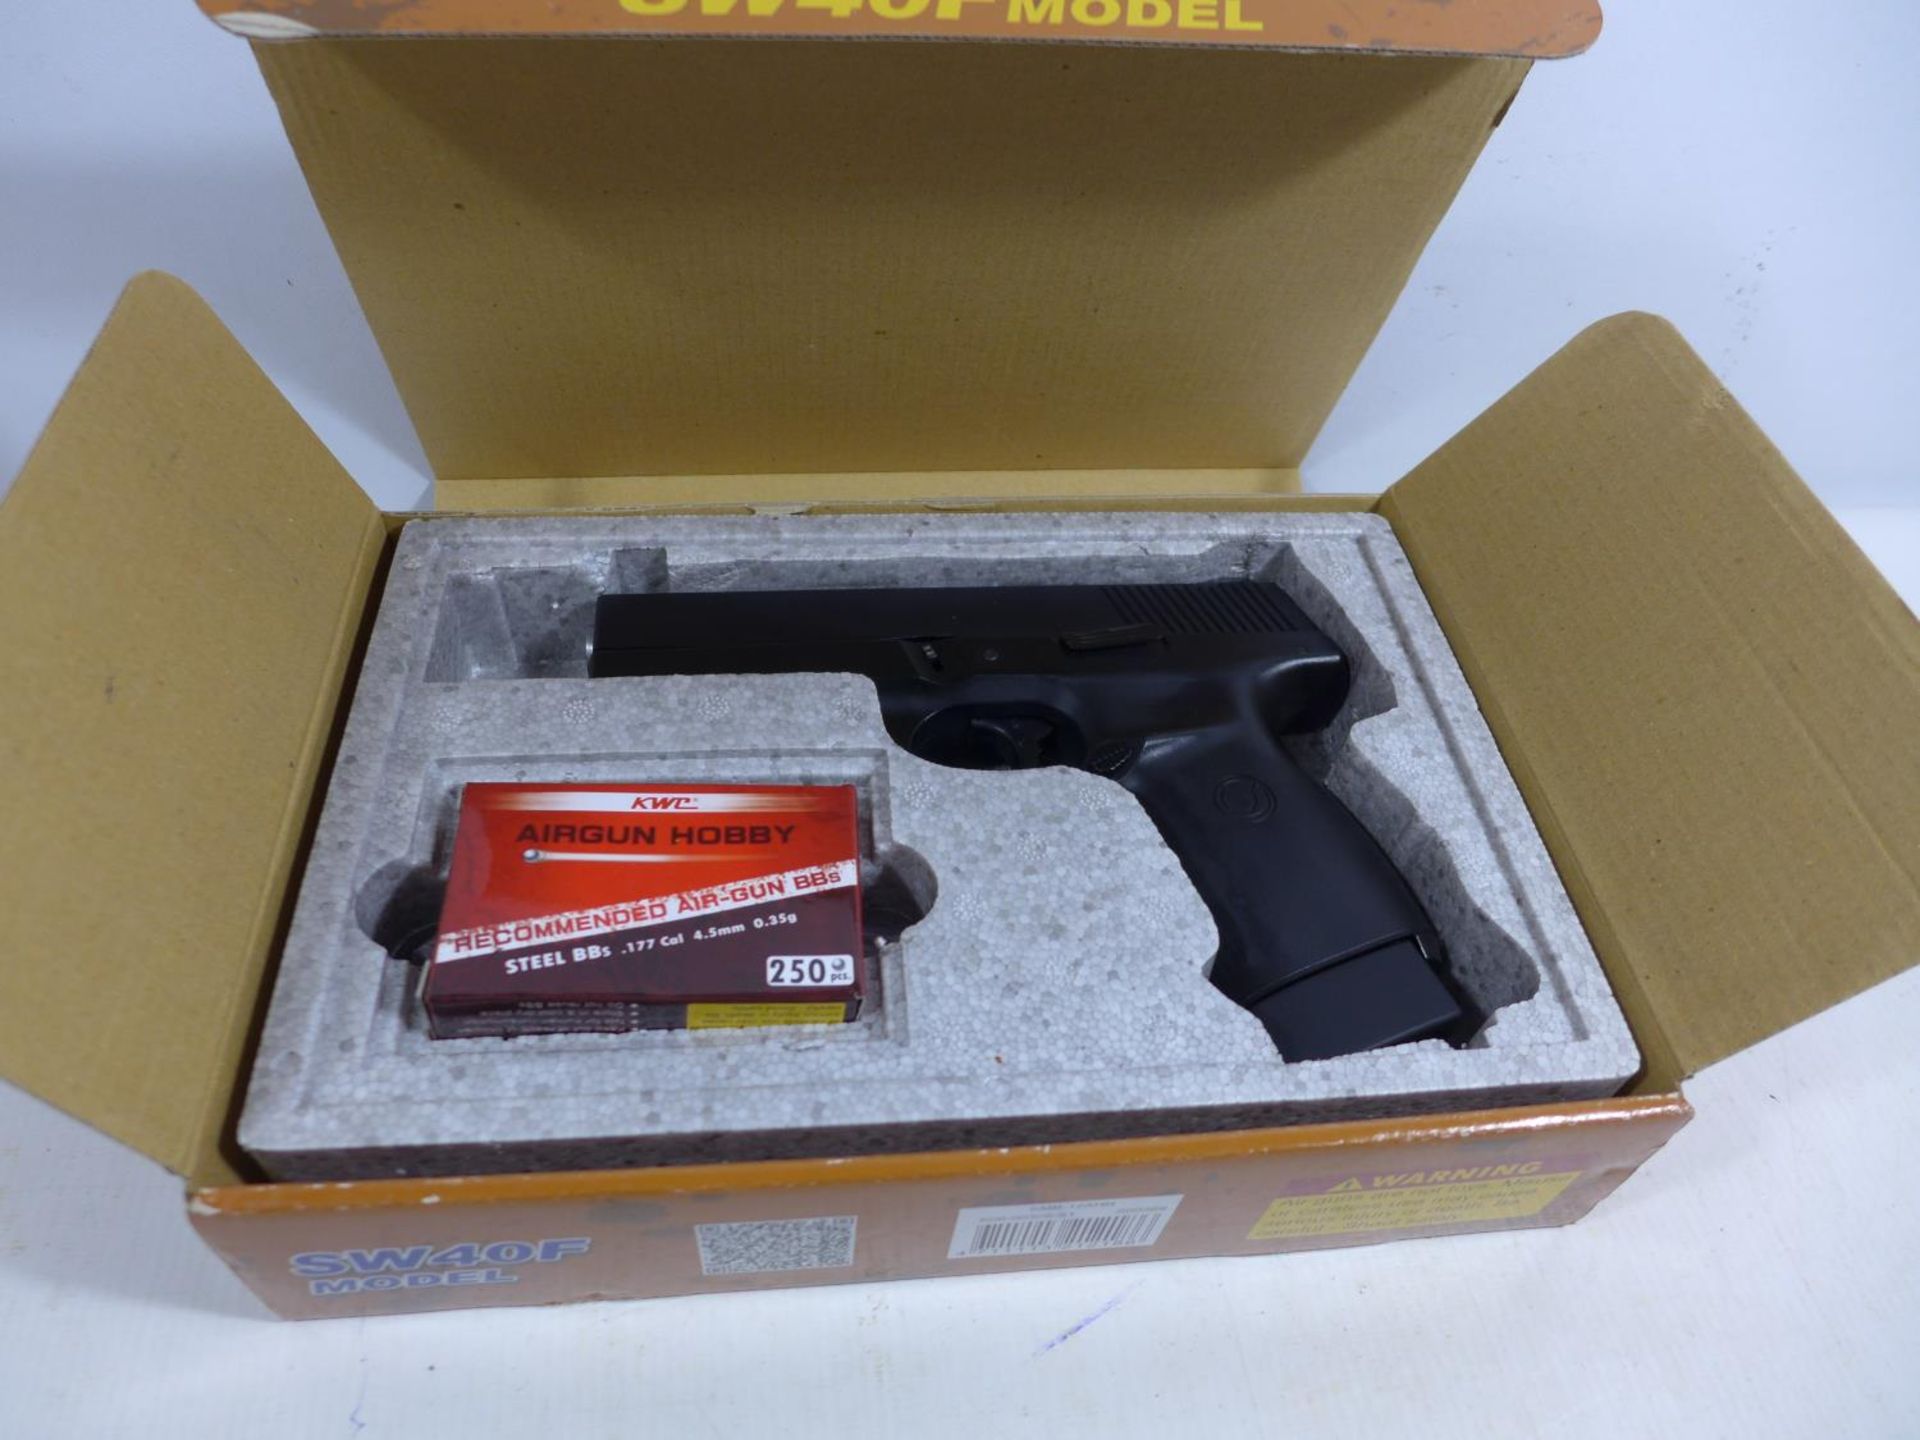 A BOXED AS NEW SW40F MODEL CO2 .177 CALIBRE AIR PISTOL, 11CM BARREL, LENGTH 19.5CM, COMPLETE WITH